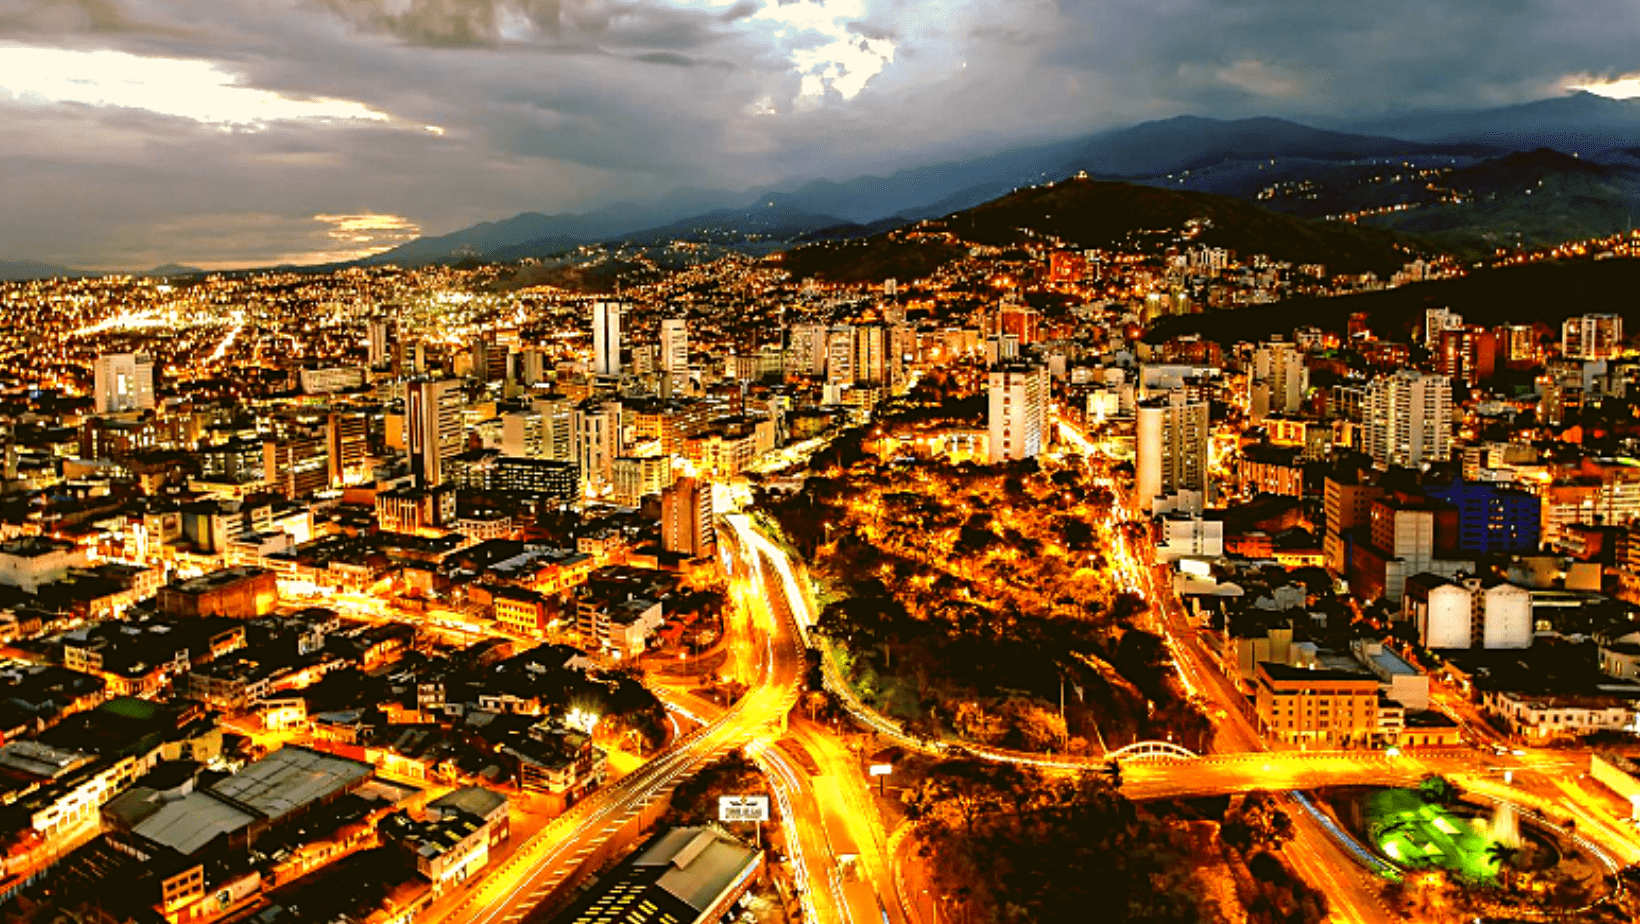 where is the best nightlife in colombia